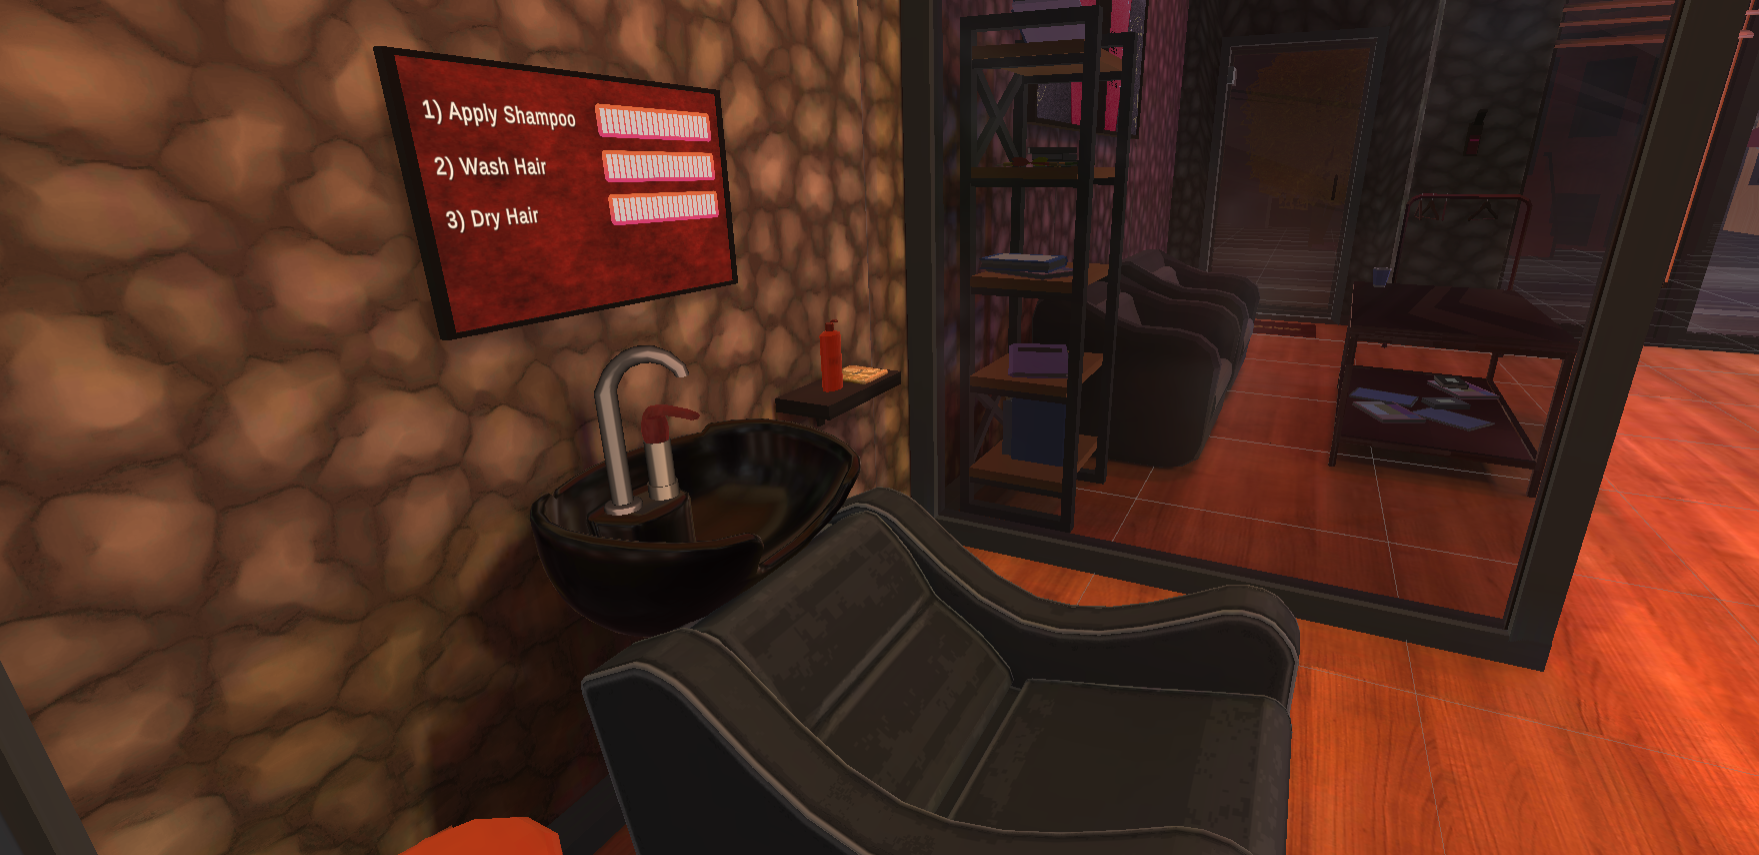 Run a Virtual Barbershop in this Quest 2 VR game